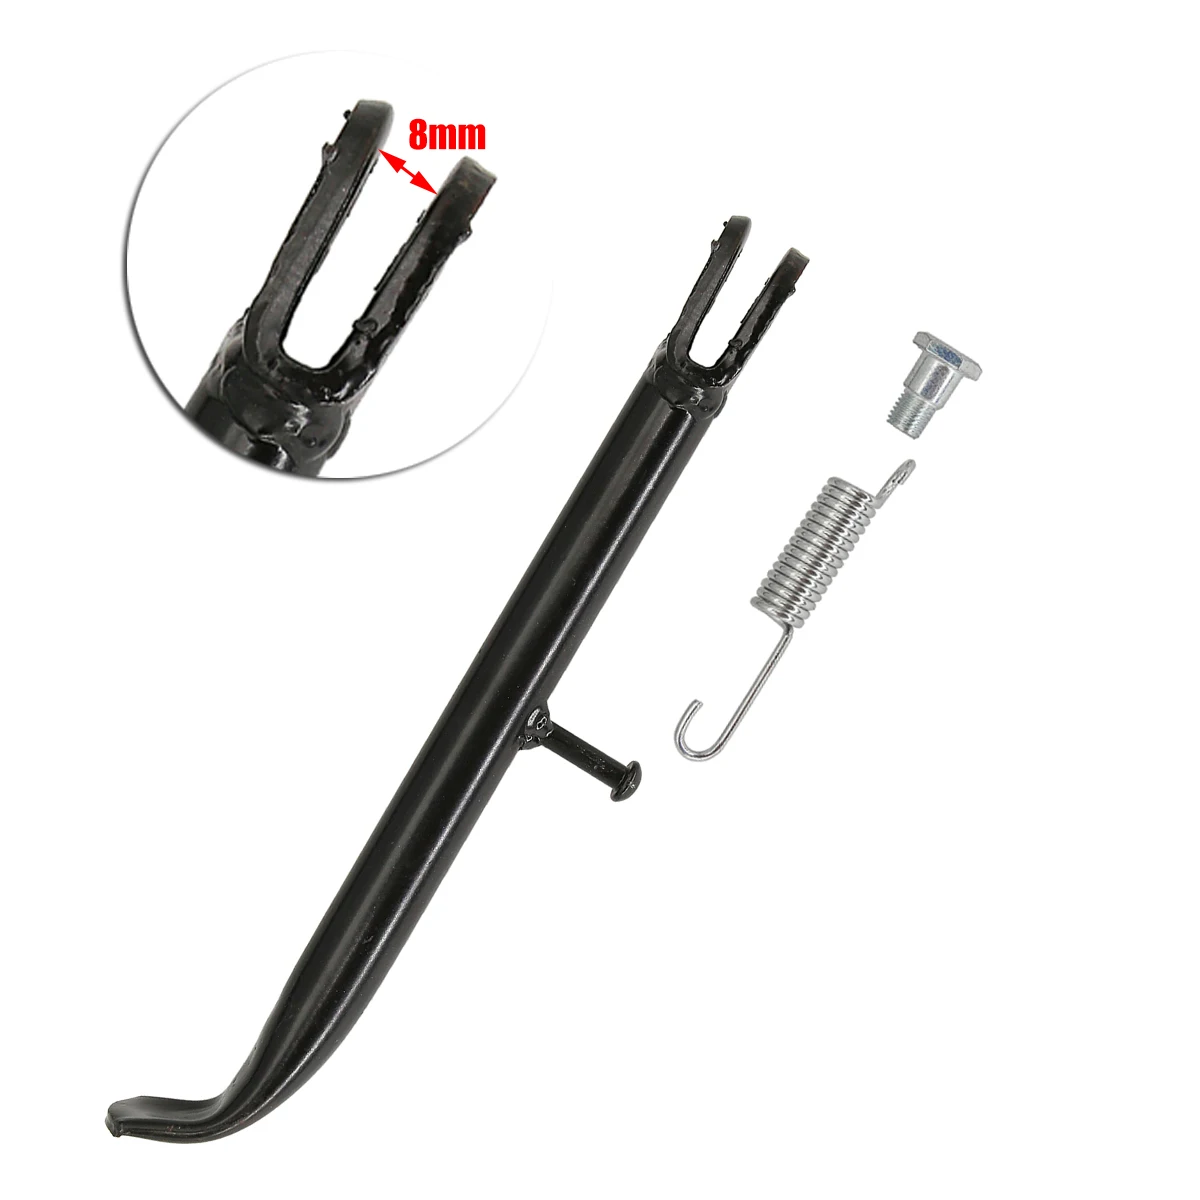 

Motorcycle Sided Bracket Support Feet Frame Stand 208-420mm For Dirt Pit Bike Apollo BSE BBR Honda CRF50/70 Side Kick Stand